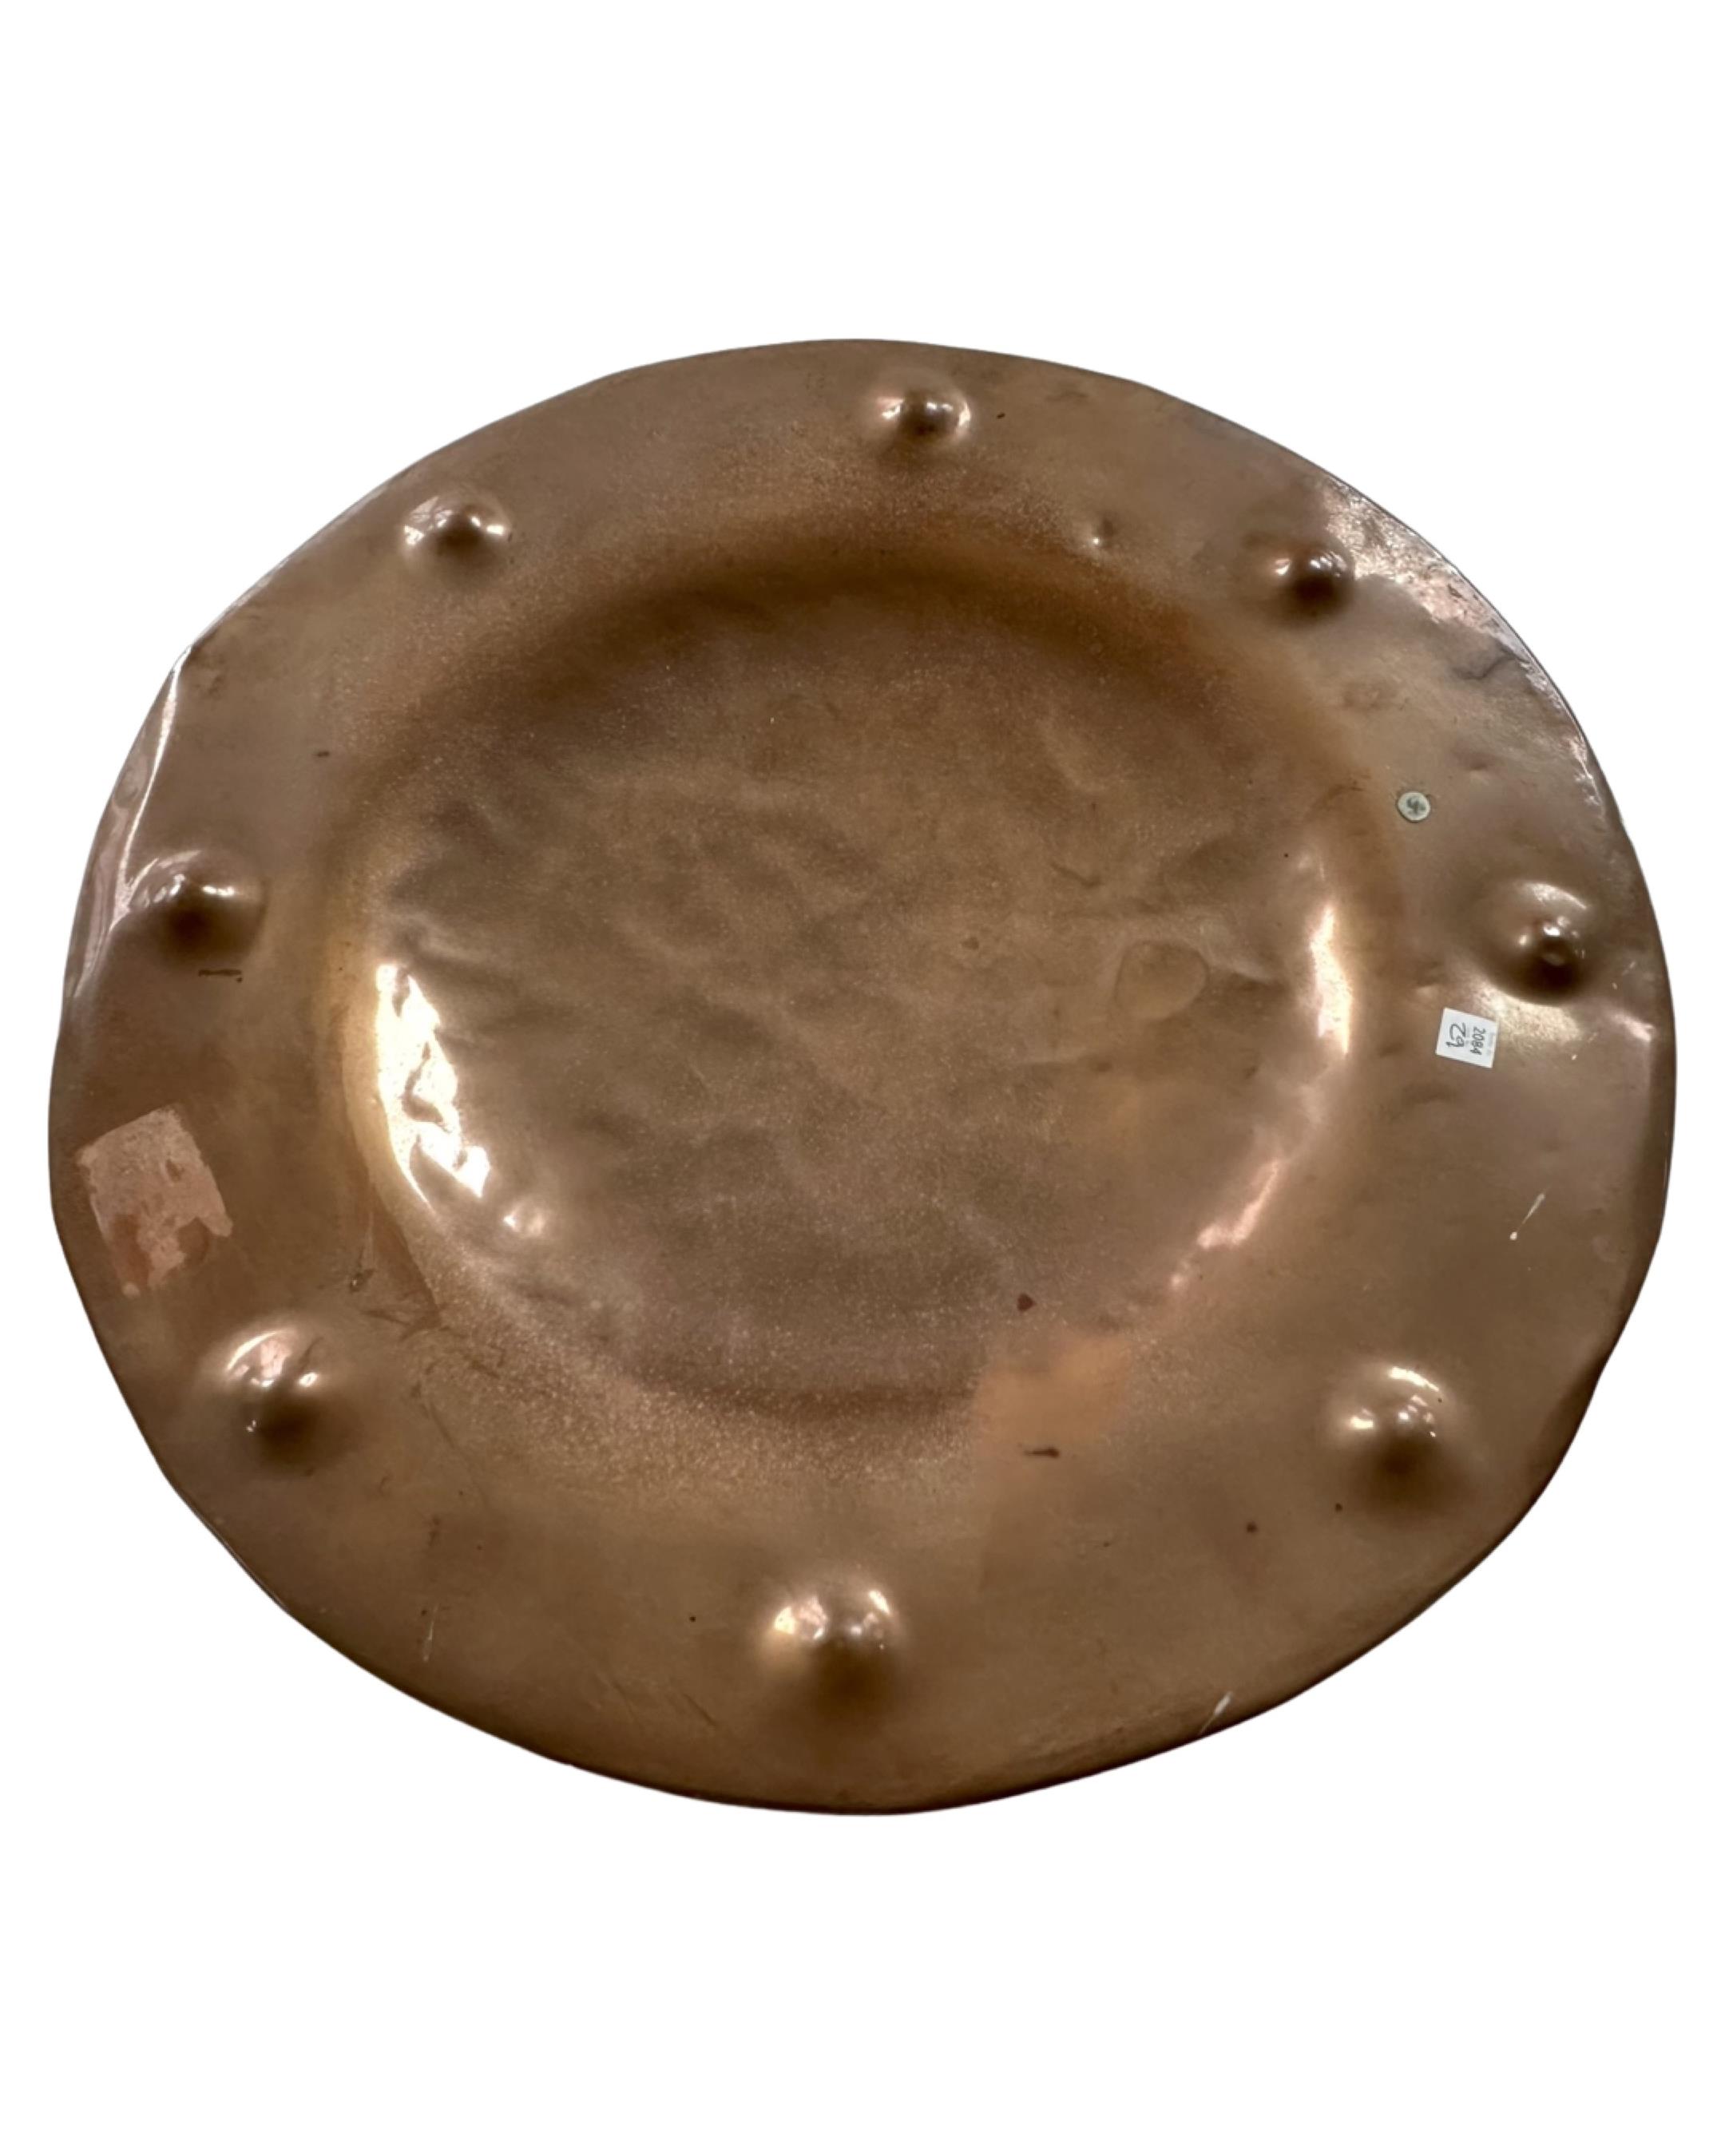 A hammered copper charger.